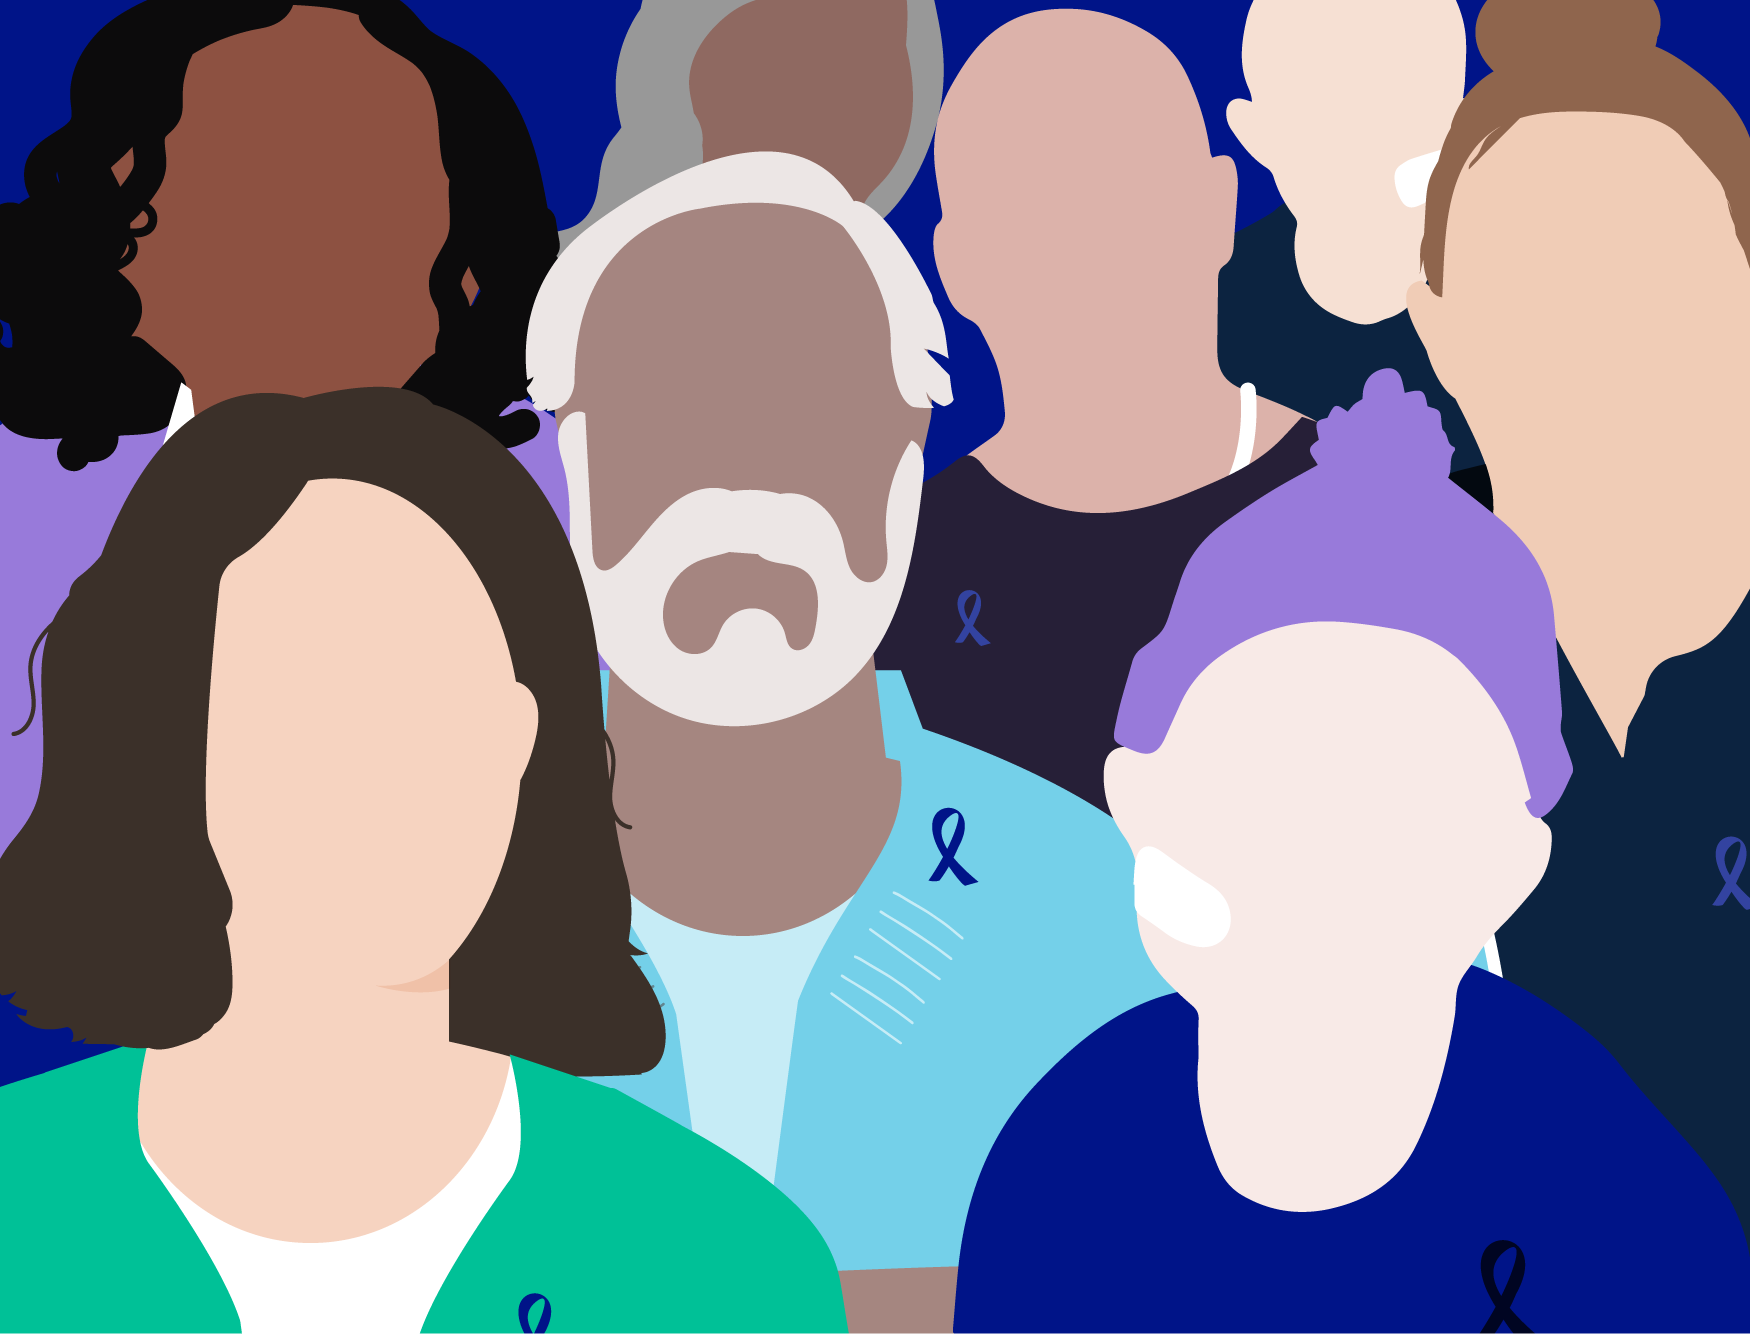 Illustration of various people standing in a crowd